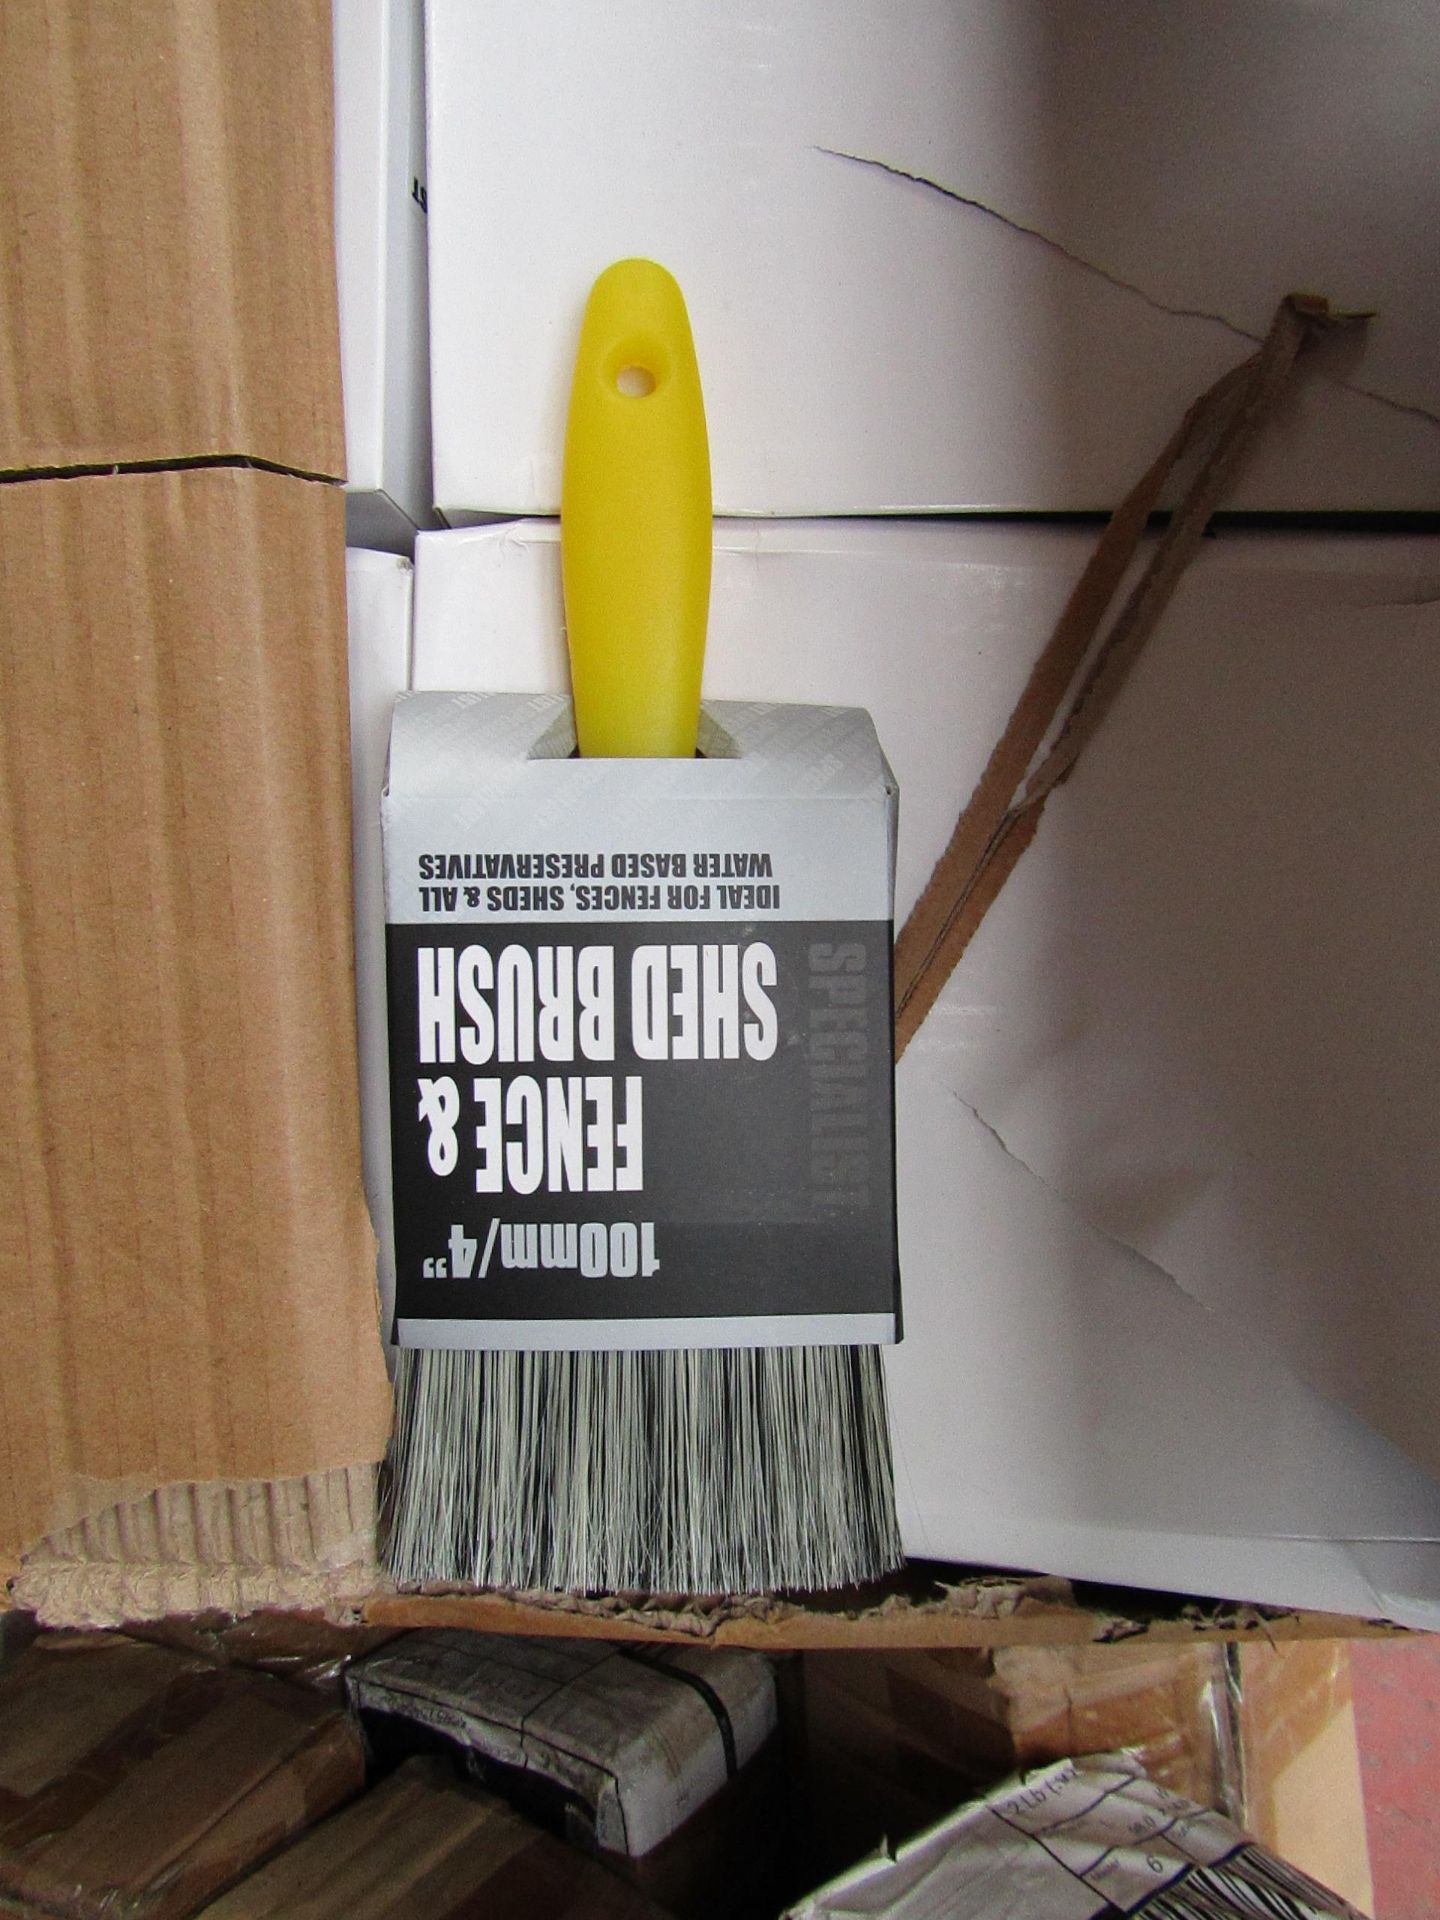 4x 100mm fence and Shed Brushes, new